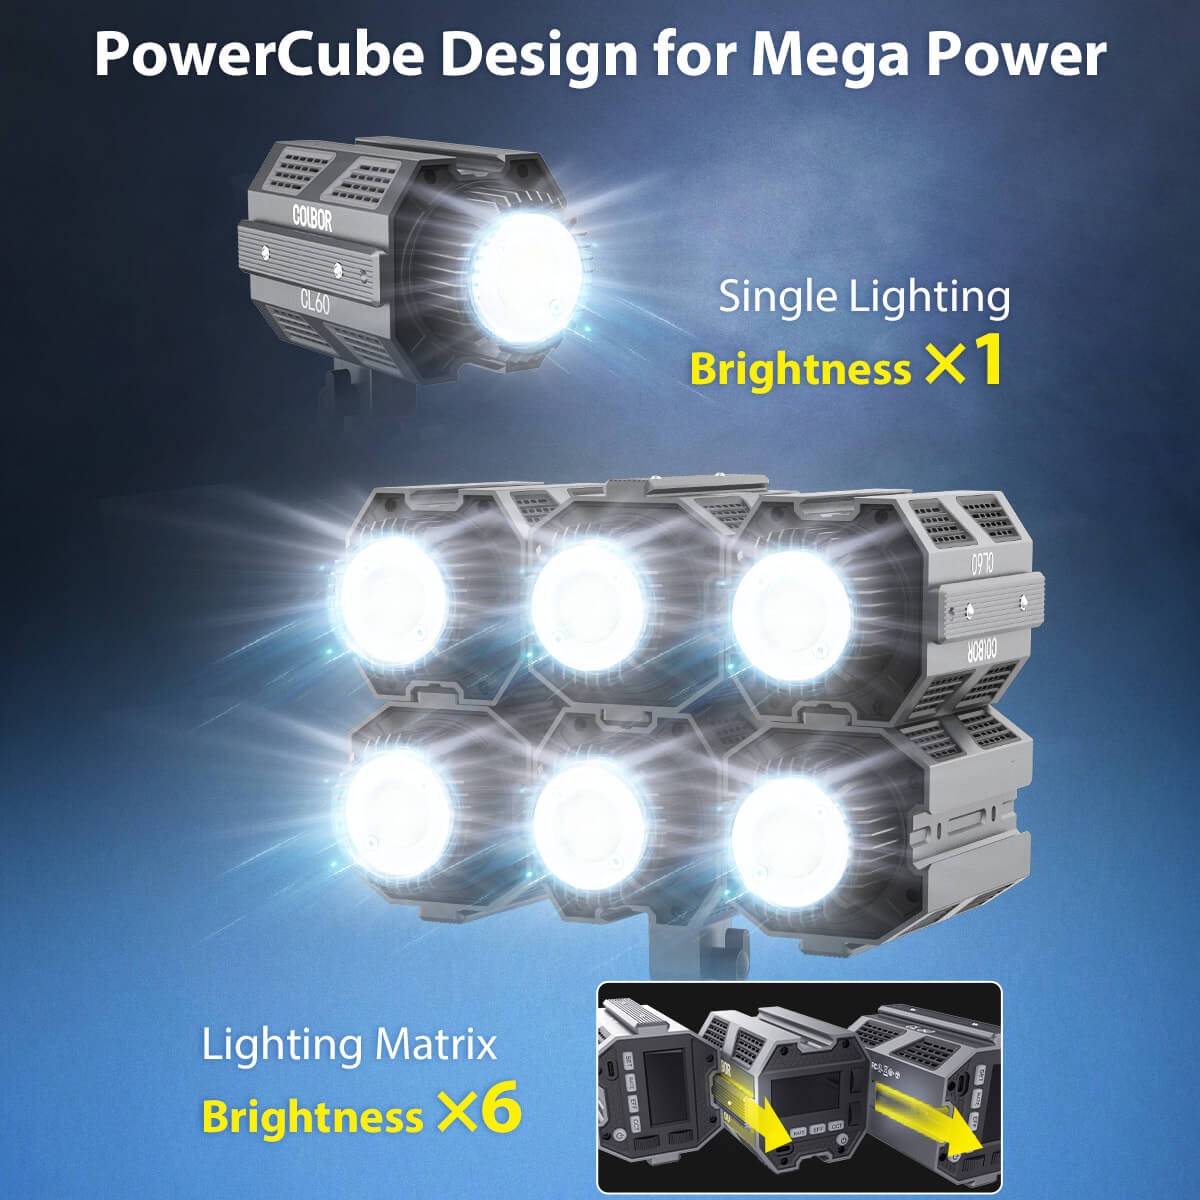 COLBOR CL60's PowerCube design allows multiple photography lights to be set up together for mega brightness